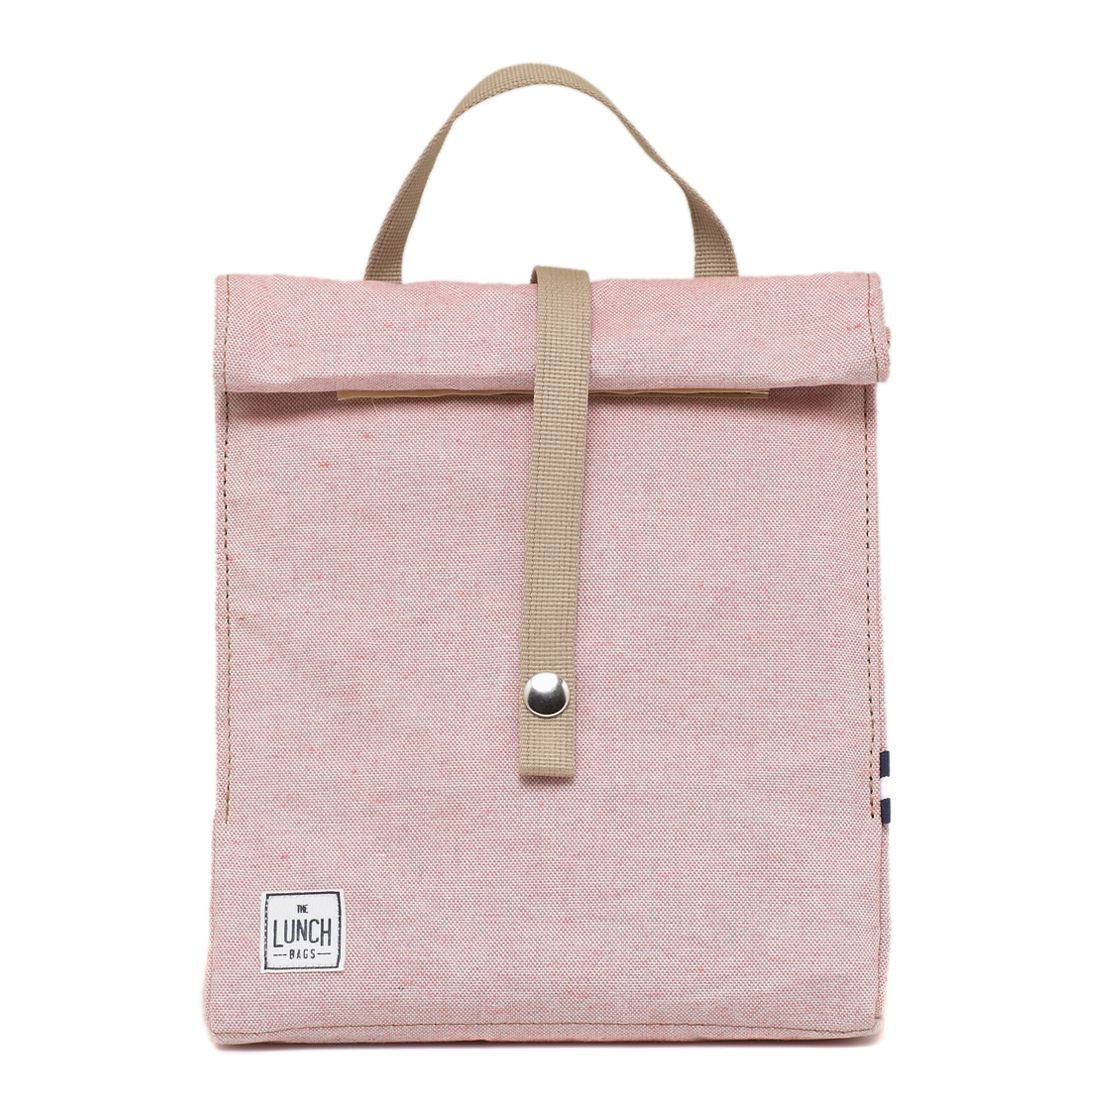 THE ORIGINAL LUNCHBAGS 5L PINK